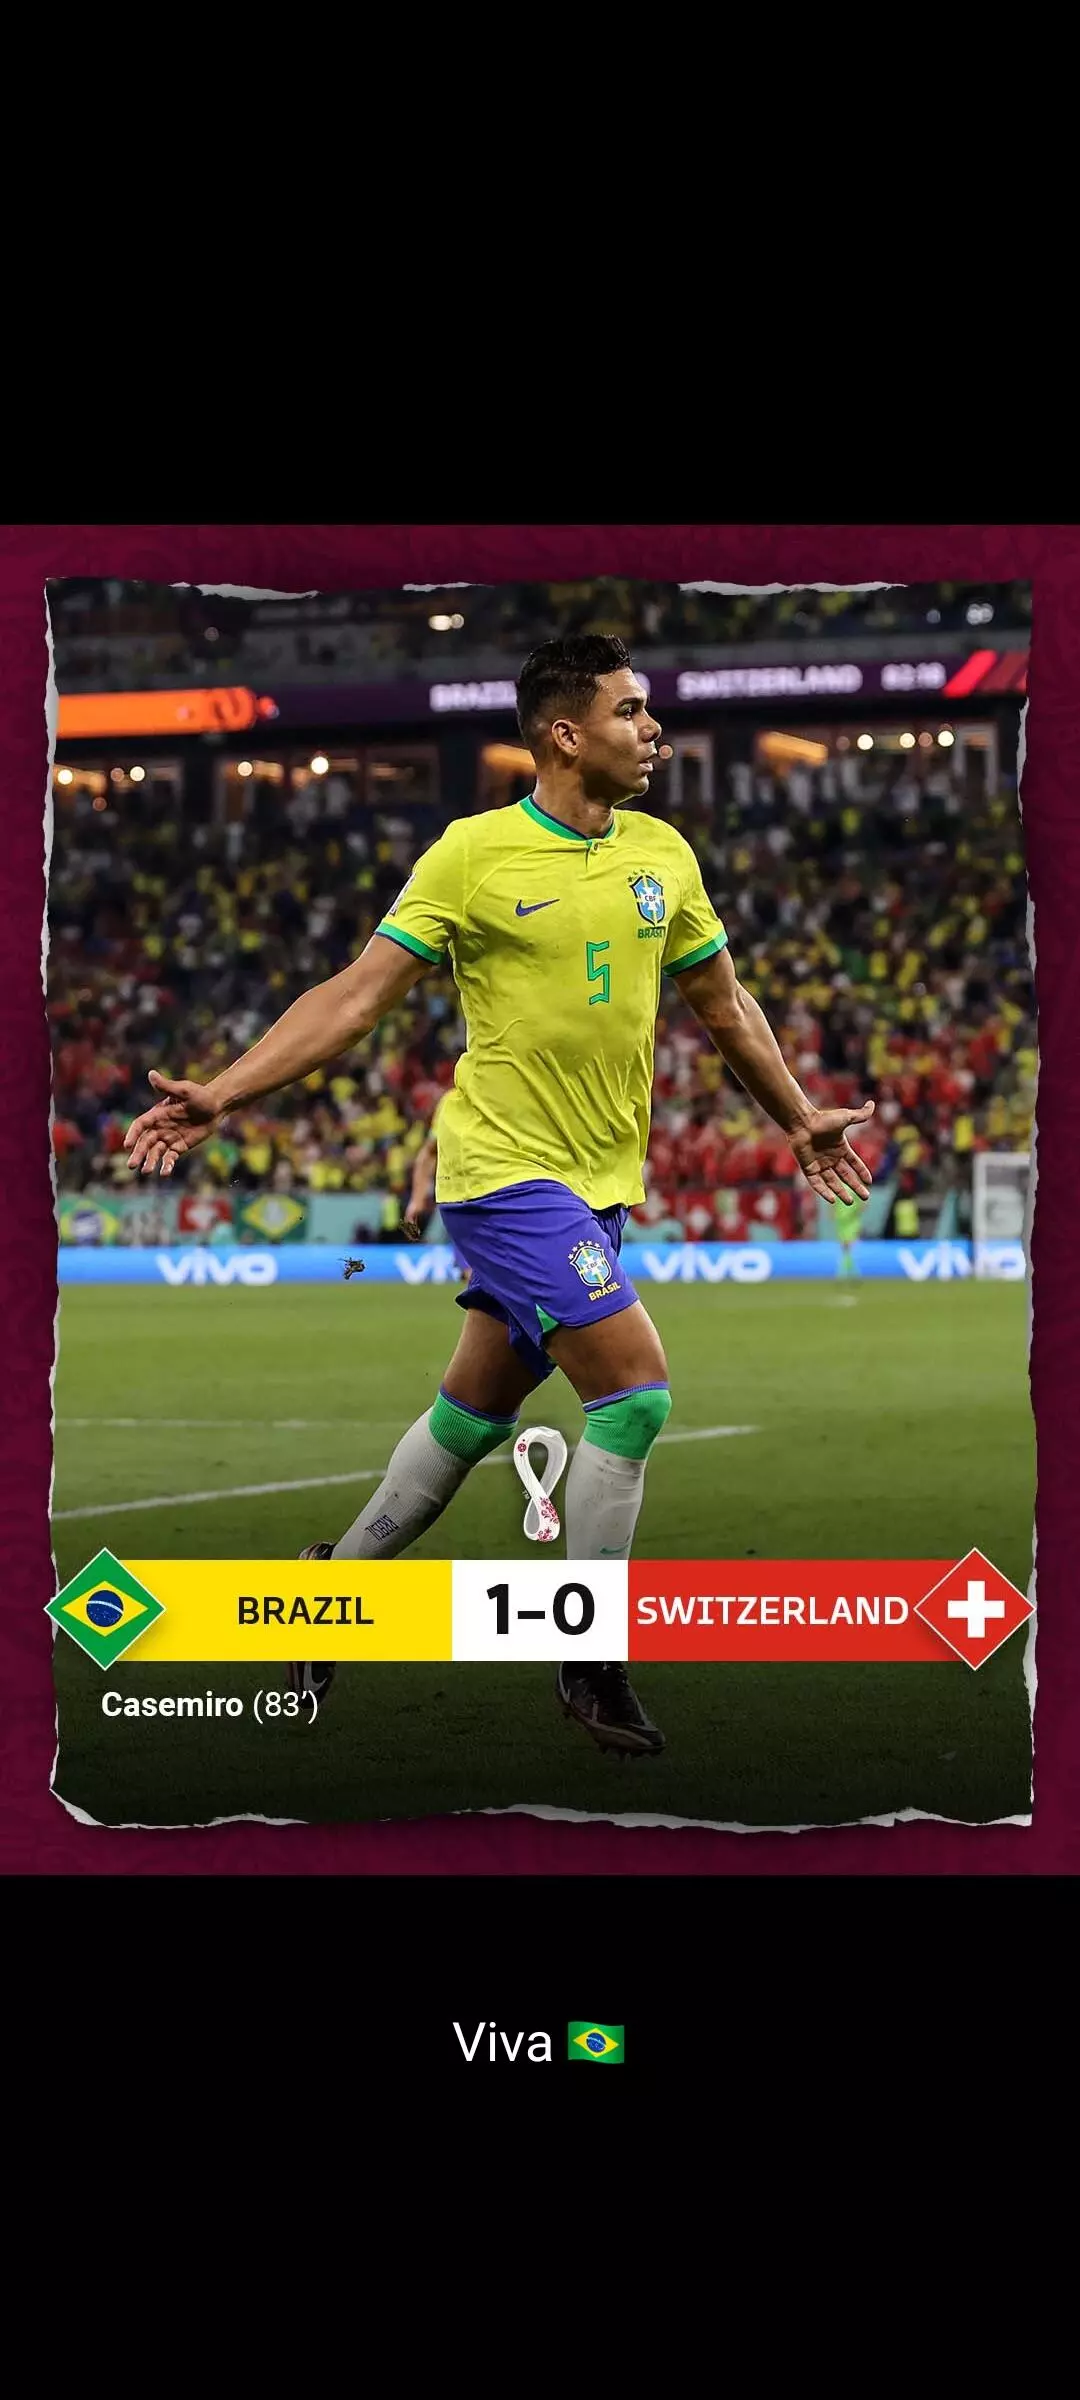 Brazil clinches spot in top 16 after a 1-0 win over Switzerland